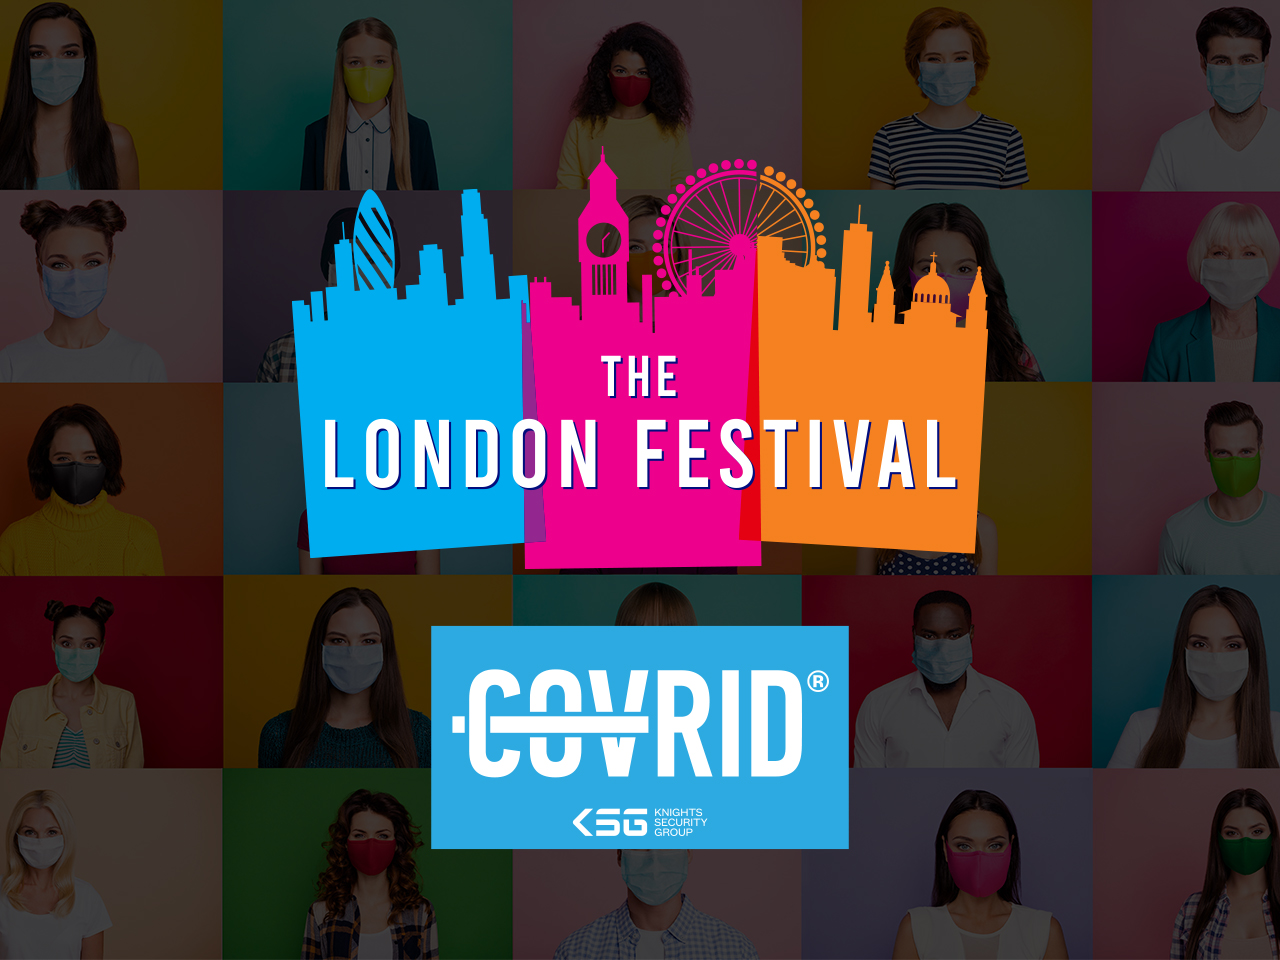 New partnership between The London Festival and Knights Security Group sets gold standard for Covid secure events.